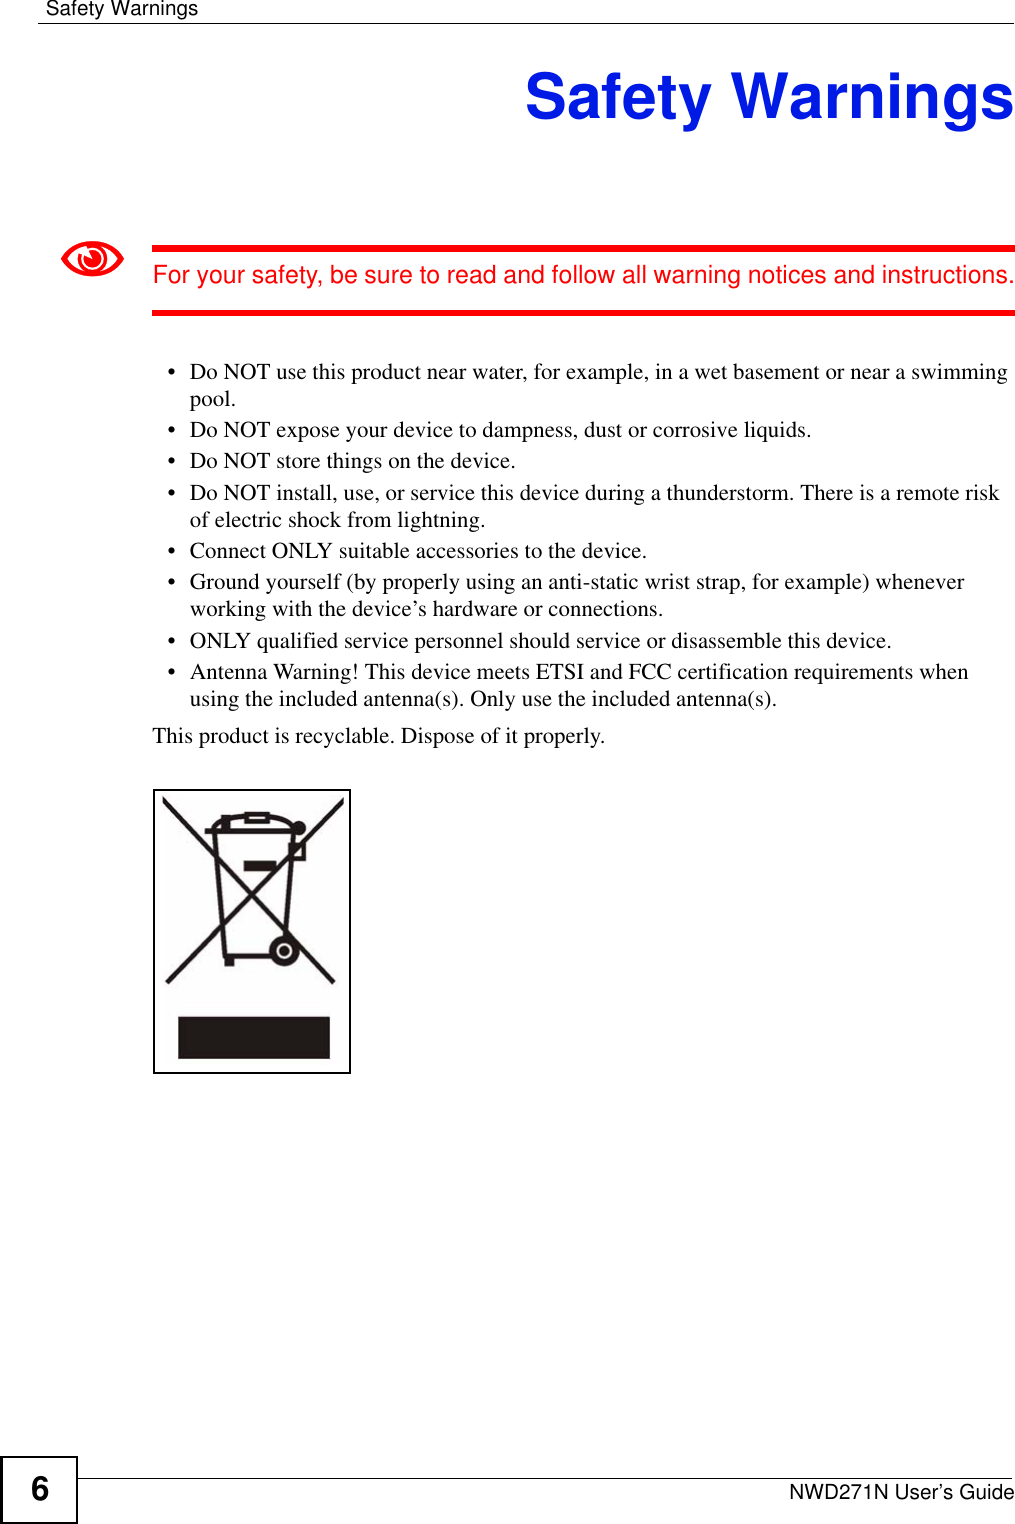 Safety WarningsNWD271N User’s Guide6Safety Warnings1For your safety, be sure to read and follow all warning notices and instructions.• Do NOT use this product near water, for example, in a wet basement or near a swimming pool.• Do NOT expose your device to dampness, dust or corrosive liquids.• Do NOT store things on the device.• Do NOT install, use, or service this device during a thunderstorm. There is a remote risk of electric shock from lightning.• Connect ONLY suitable accessories to the device.• Ground yourself (by properly using an anti-static wrist strap, for example) whenever working with the device’s hardware or connections.• ONLY qualified service personnel should service or disassemble this device.• Antenna Warning! This device meets ETSI and FCC certification requirements when using the included antenna(s). Only use the included antenna(s).This product is recyclable. Dispose of it properly.  